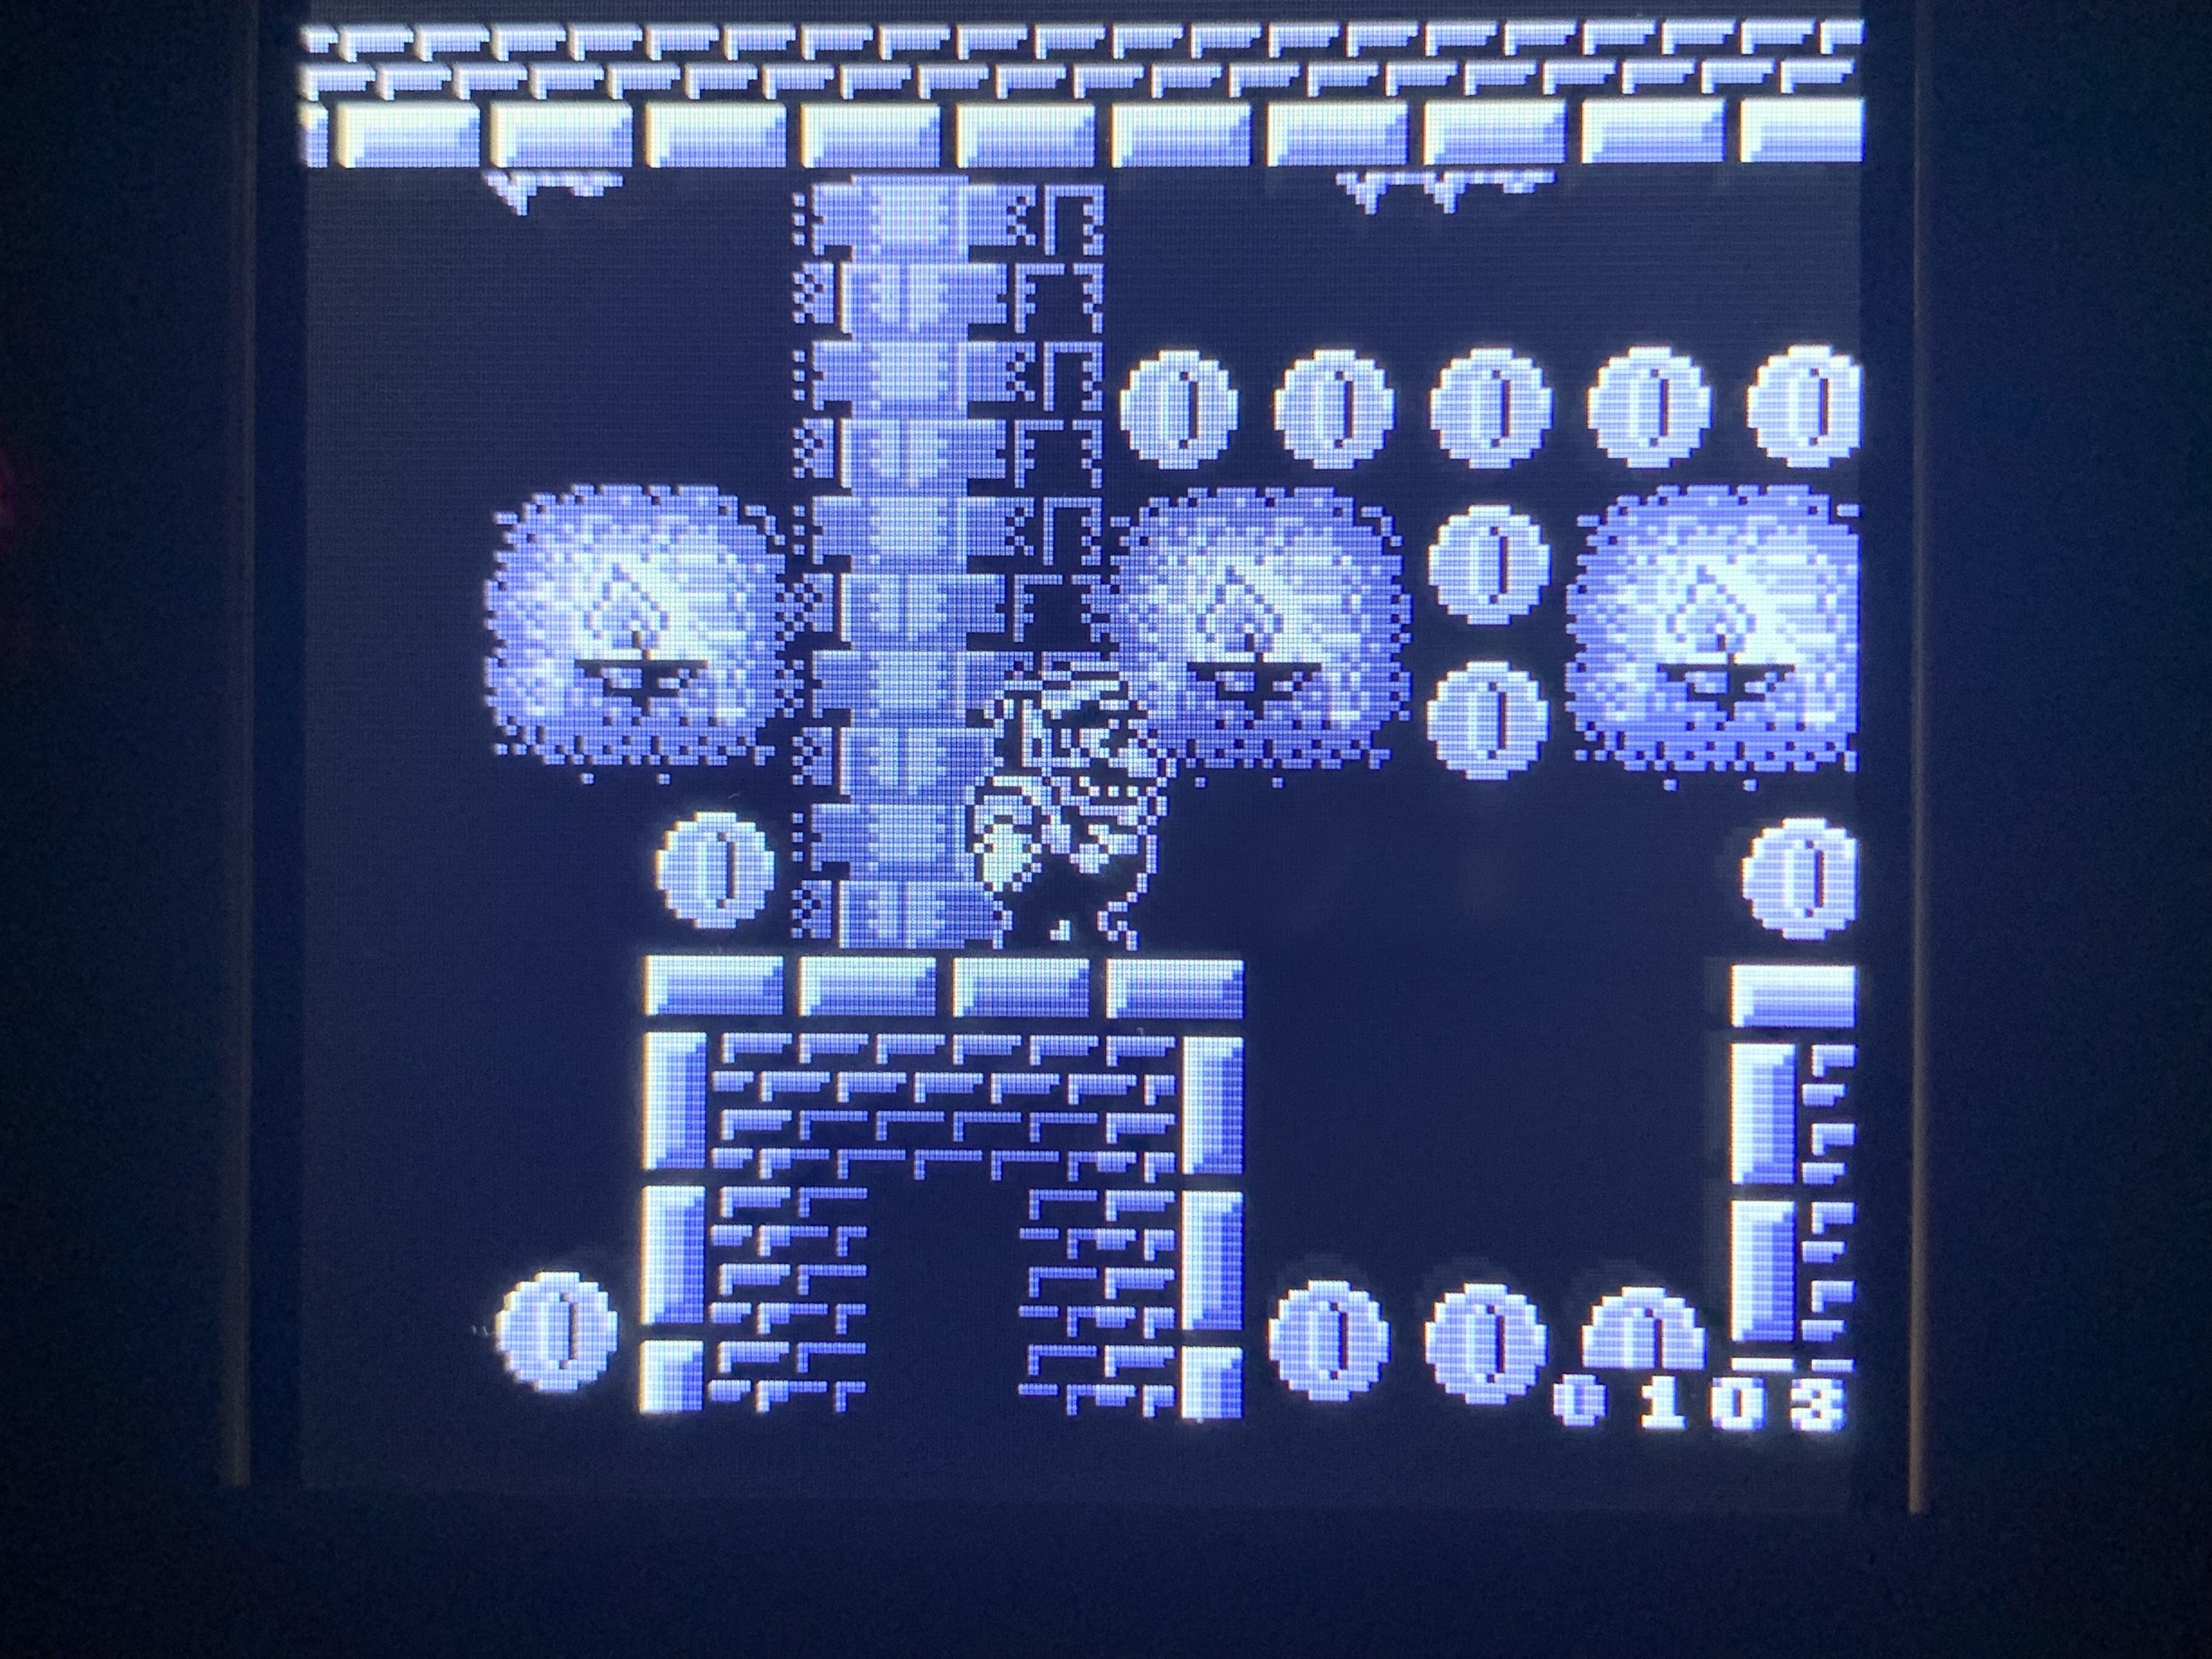 Wario standing on a brick ledge in the scary mansion, candles in the background and many coins as well to collect. The image is monochromatic with several shades. 